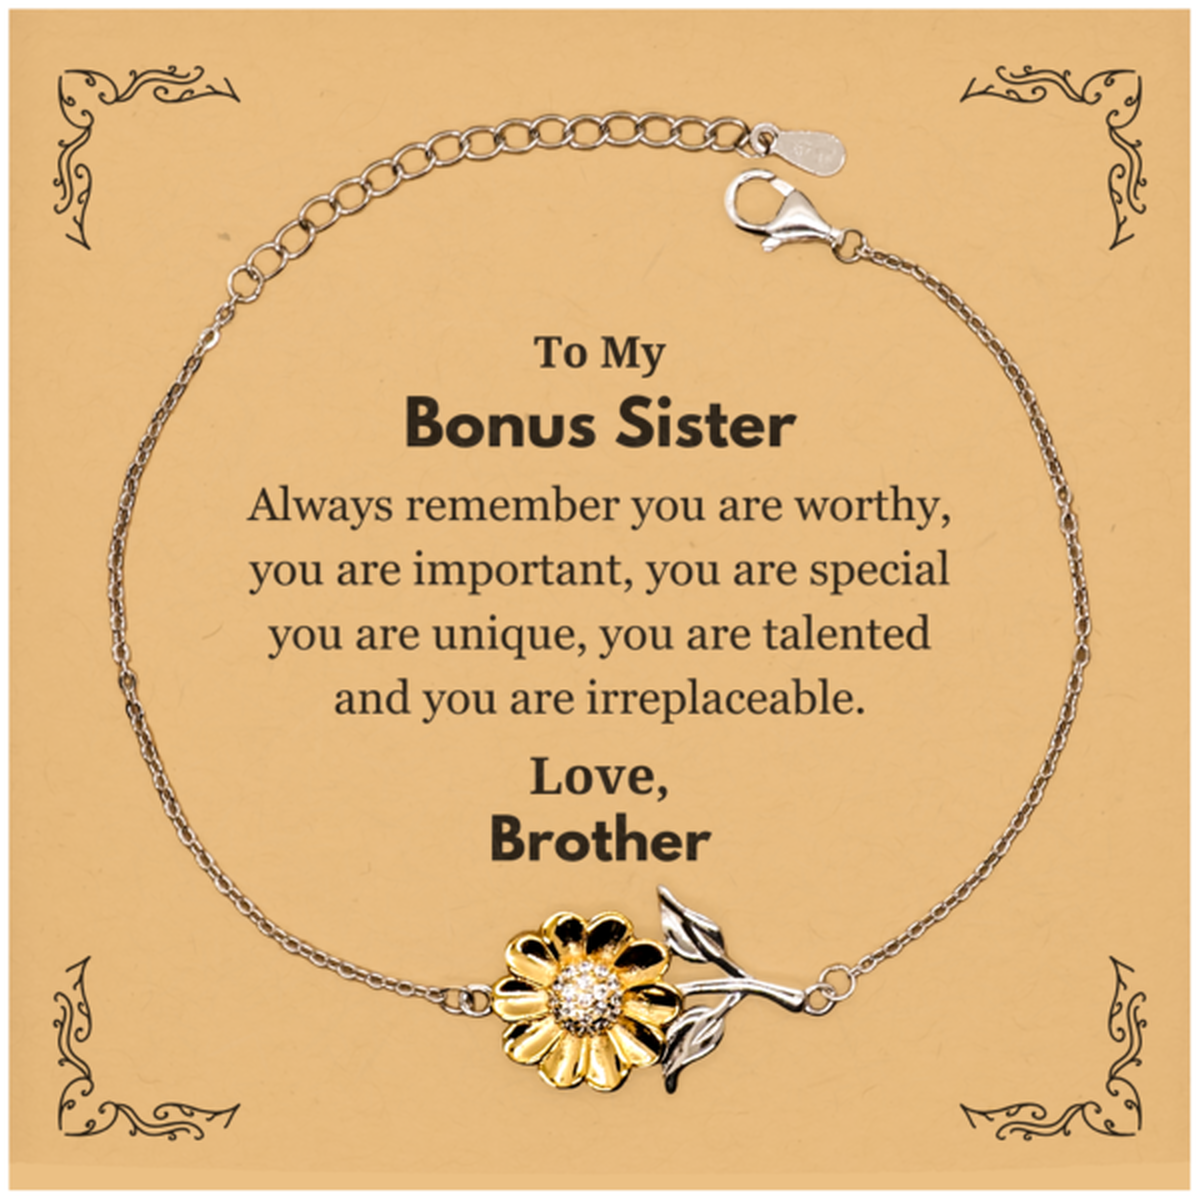 Bonus Sister Birthday Gifts from Brother, Inspirational Sunflower Bracelet for Bonus Sister Christmas Graduation Gifts for Bonus Sister Always remember you are worthy, you are important. Love, Brother